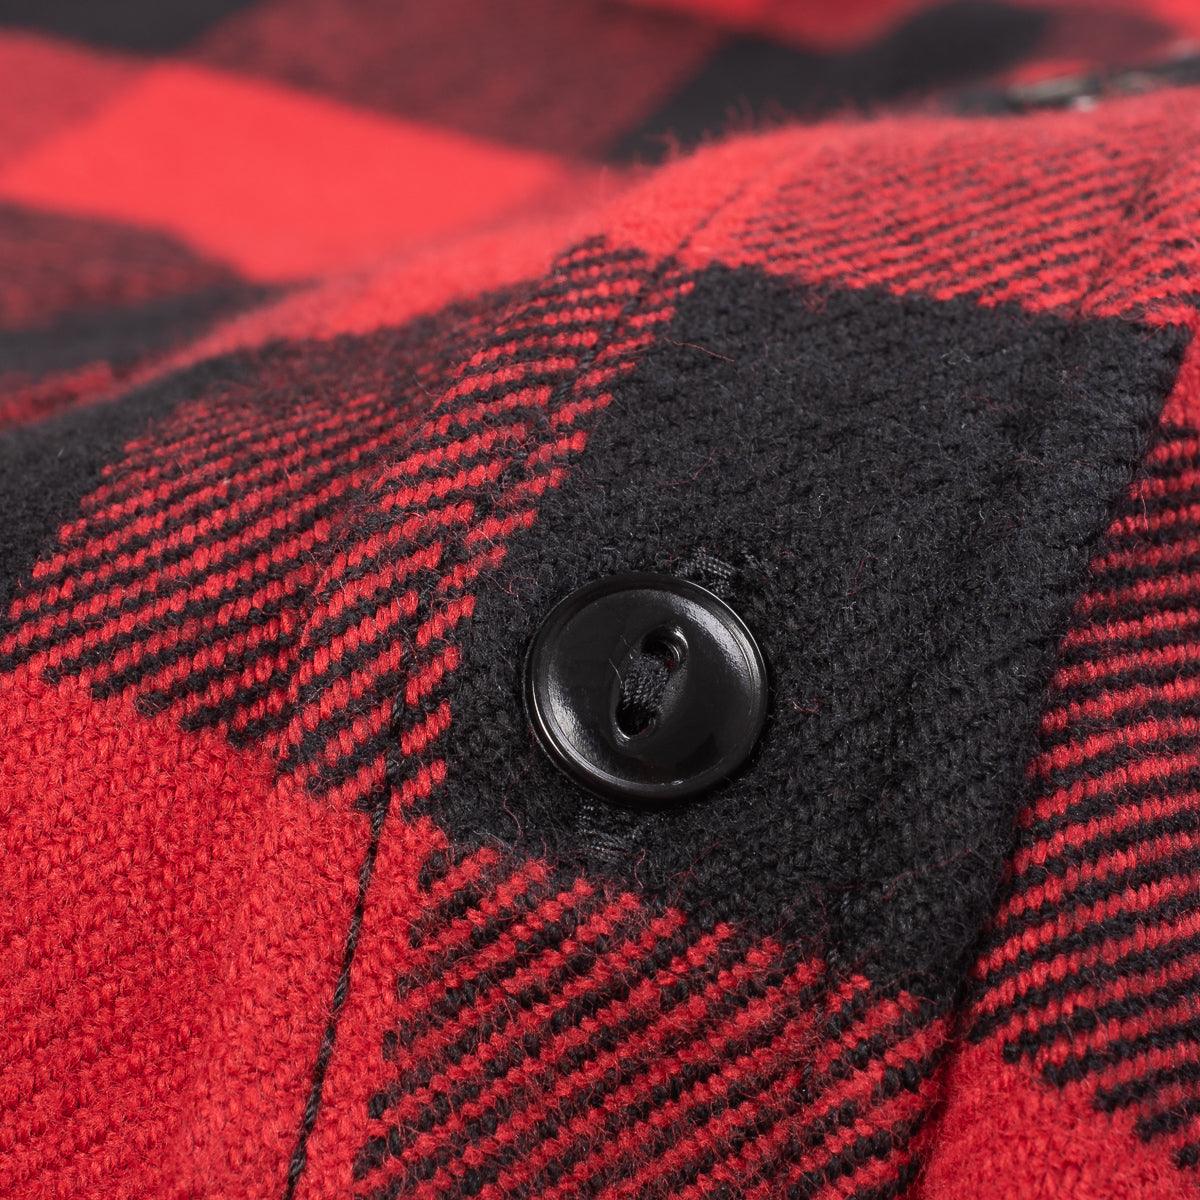 Image showing the IHSH-244-RED - Ultra Heavy Flannel Buffalo Check Work Shirt - Red/Black which is a Shirts described by the following info Back In, IHSALE_M23, Iron Heart, Released, Shirts, Tops and sold on the IRON HEART GERMANY online store